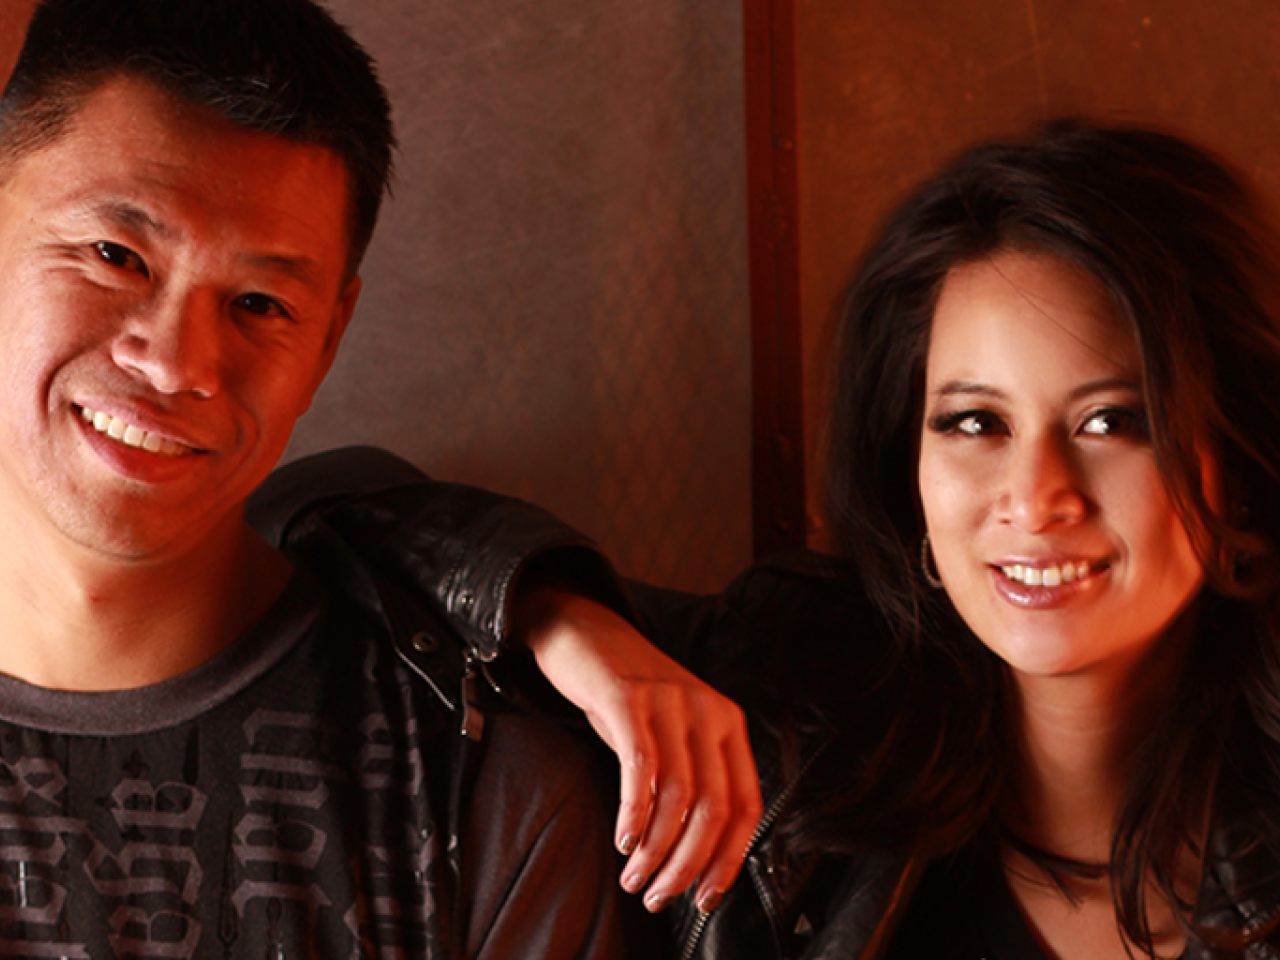 New Day husband and wife filmmaking team Baldwin Chiu and Larissa Lam look directly in the camera smiling softly. Larissa is wearing a leather jacket and has her arm on Baldwin’s shoulder. He is wearing a black shirt with writing on it. They are bathed in red lighting.